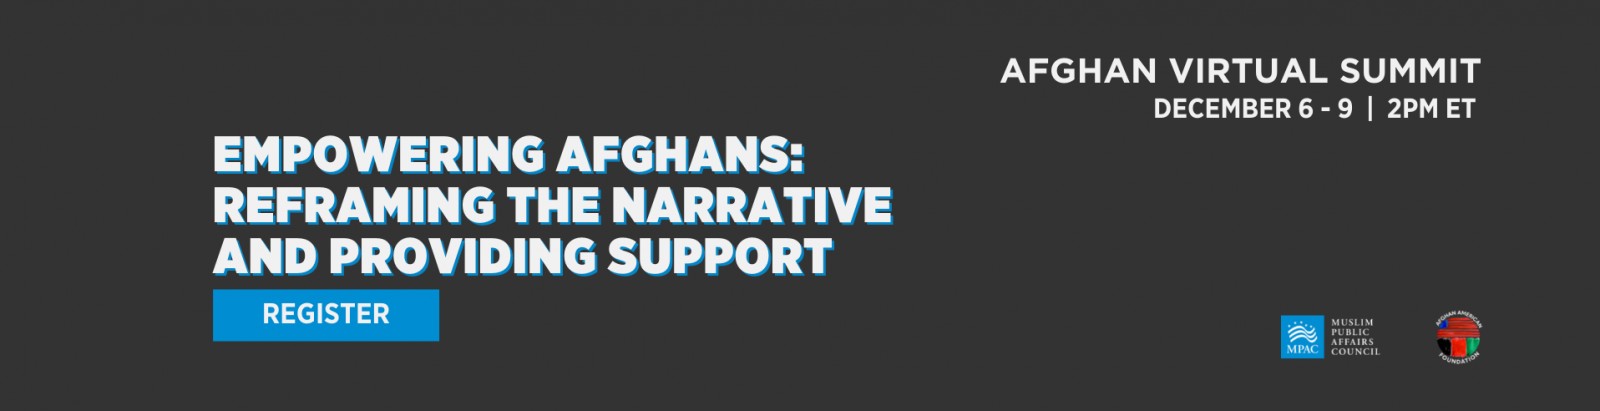 Empowering Afghans:Reframing the Narrative and Providing Support